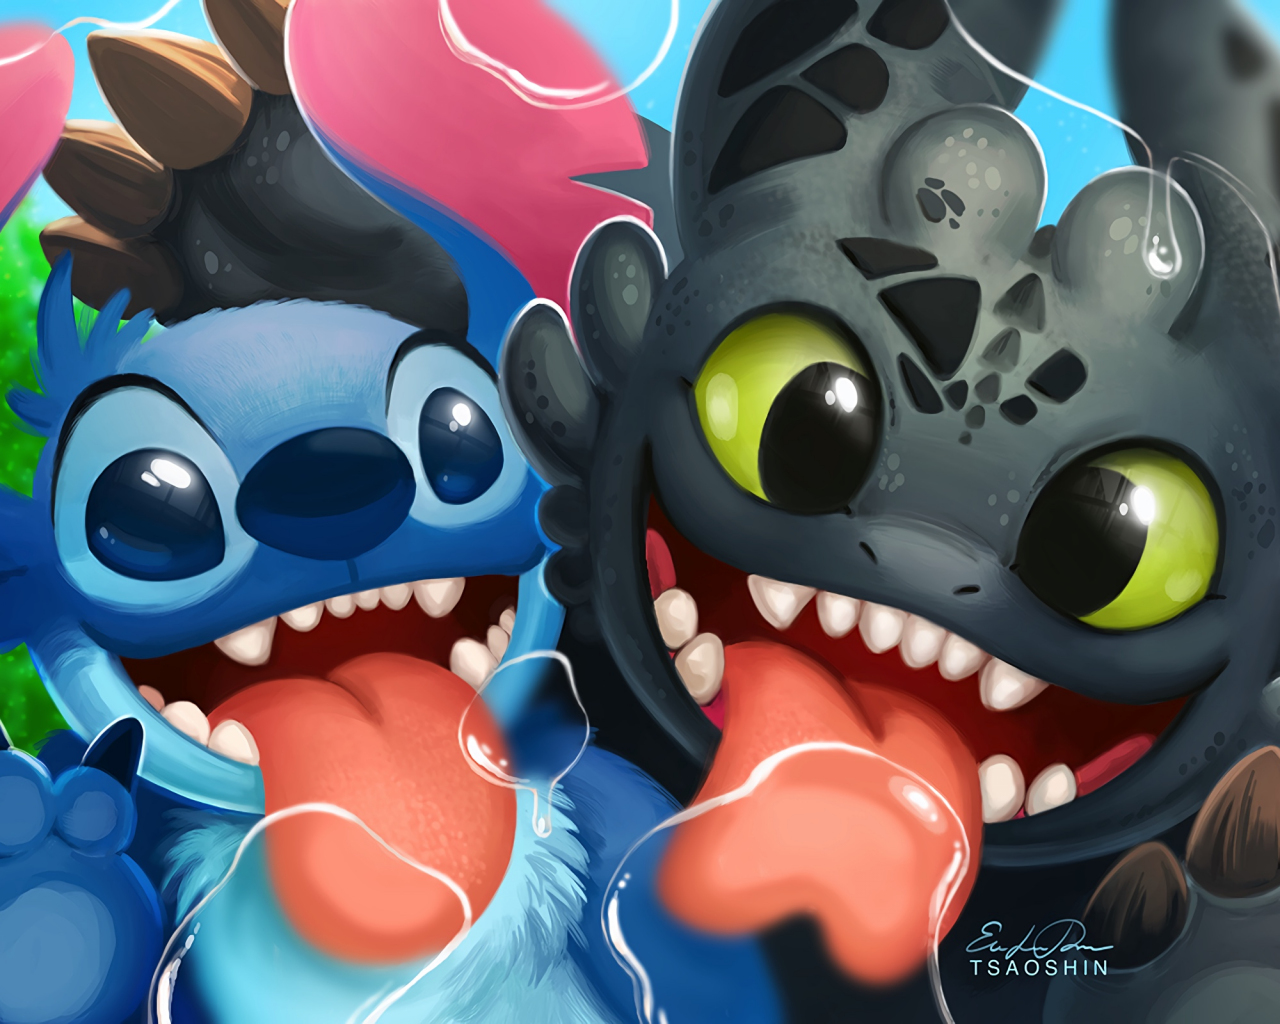 Desktop Wallpaper Stitch, Lilo And Stitch, Toothless, How To Train Your